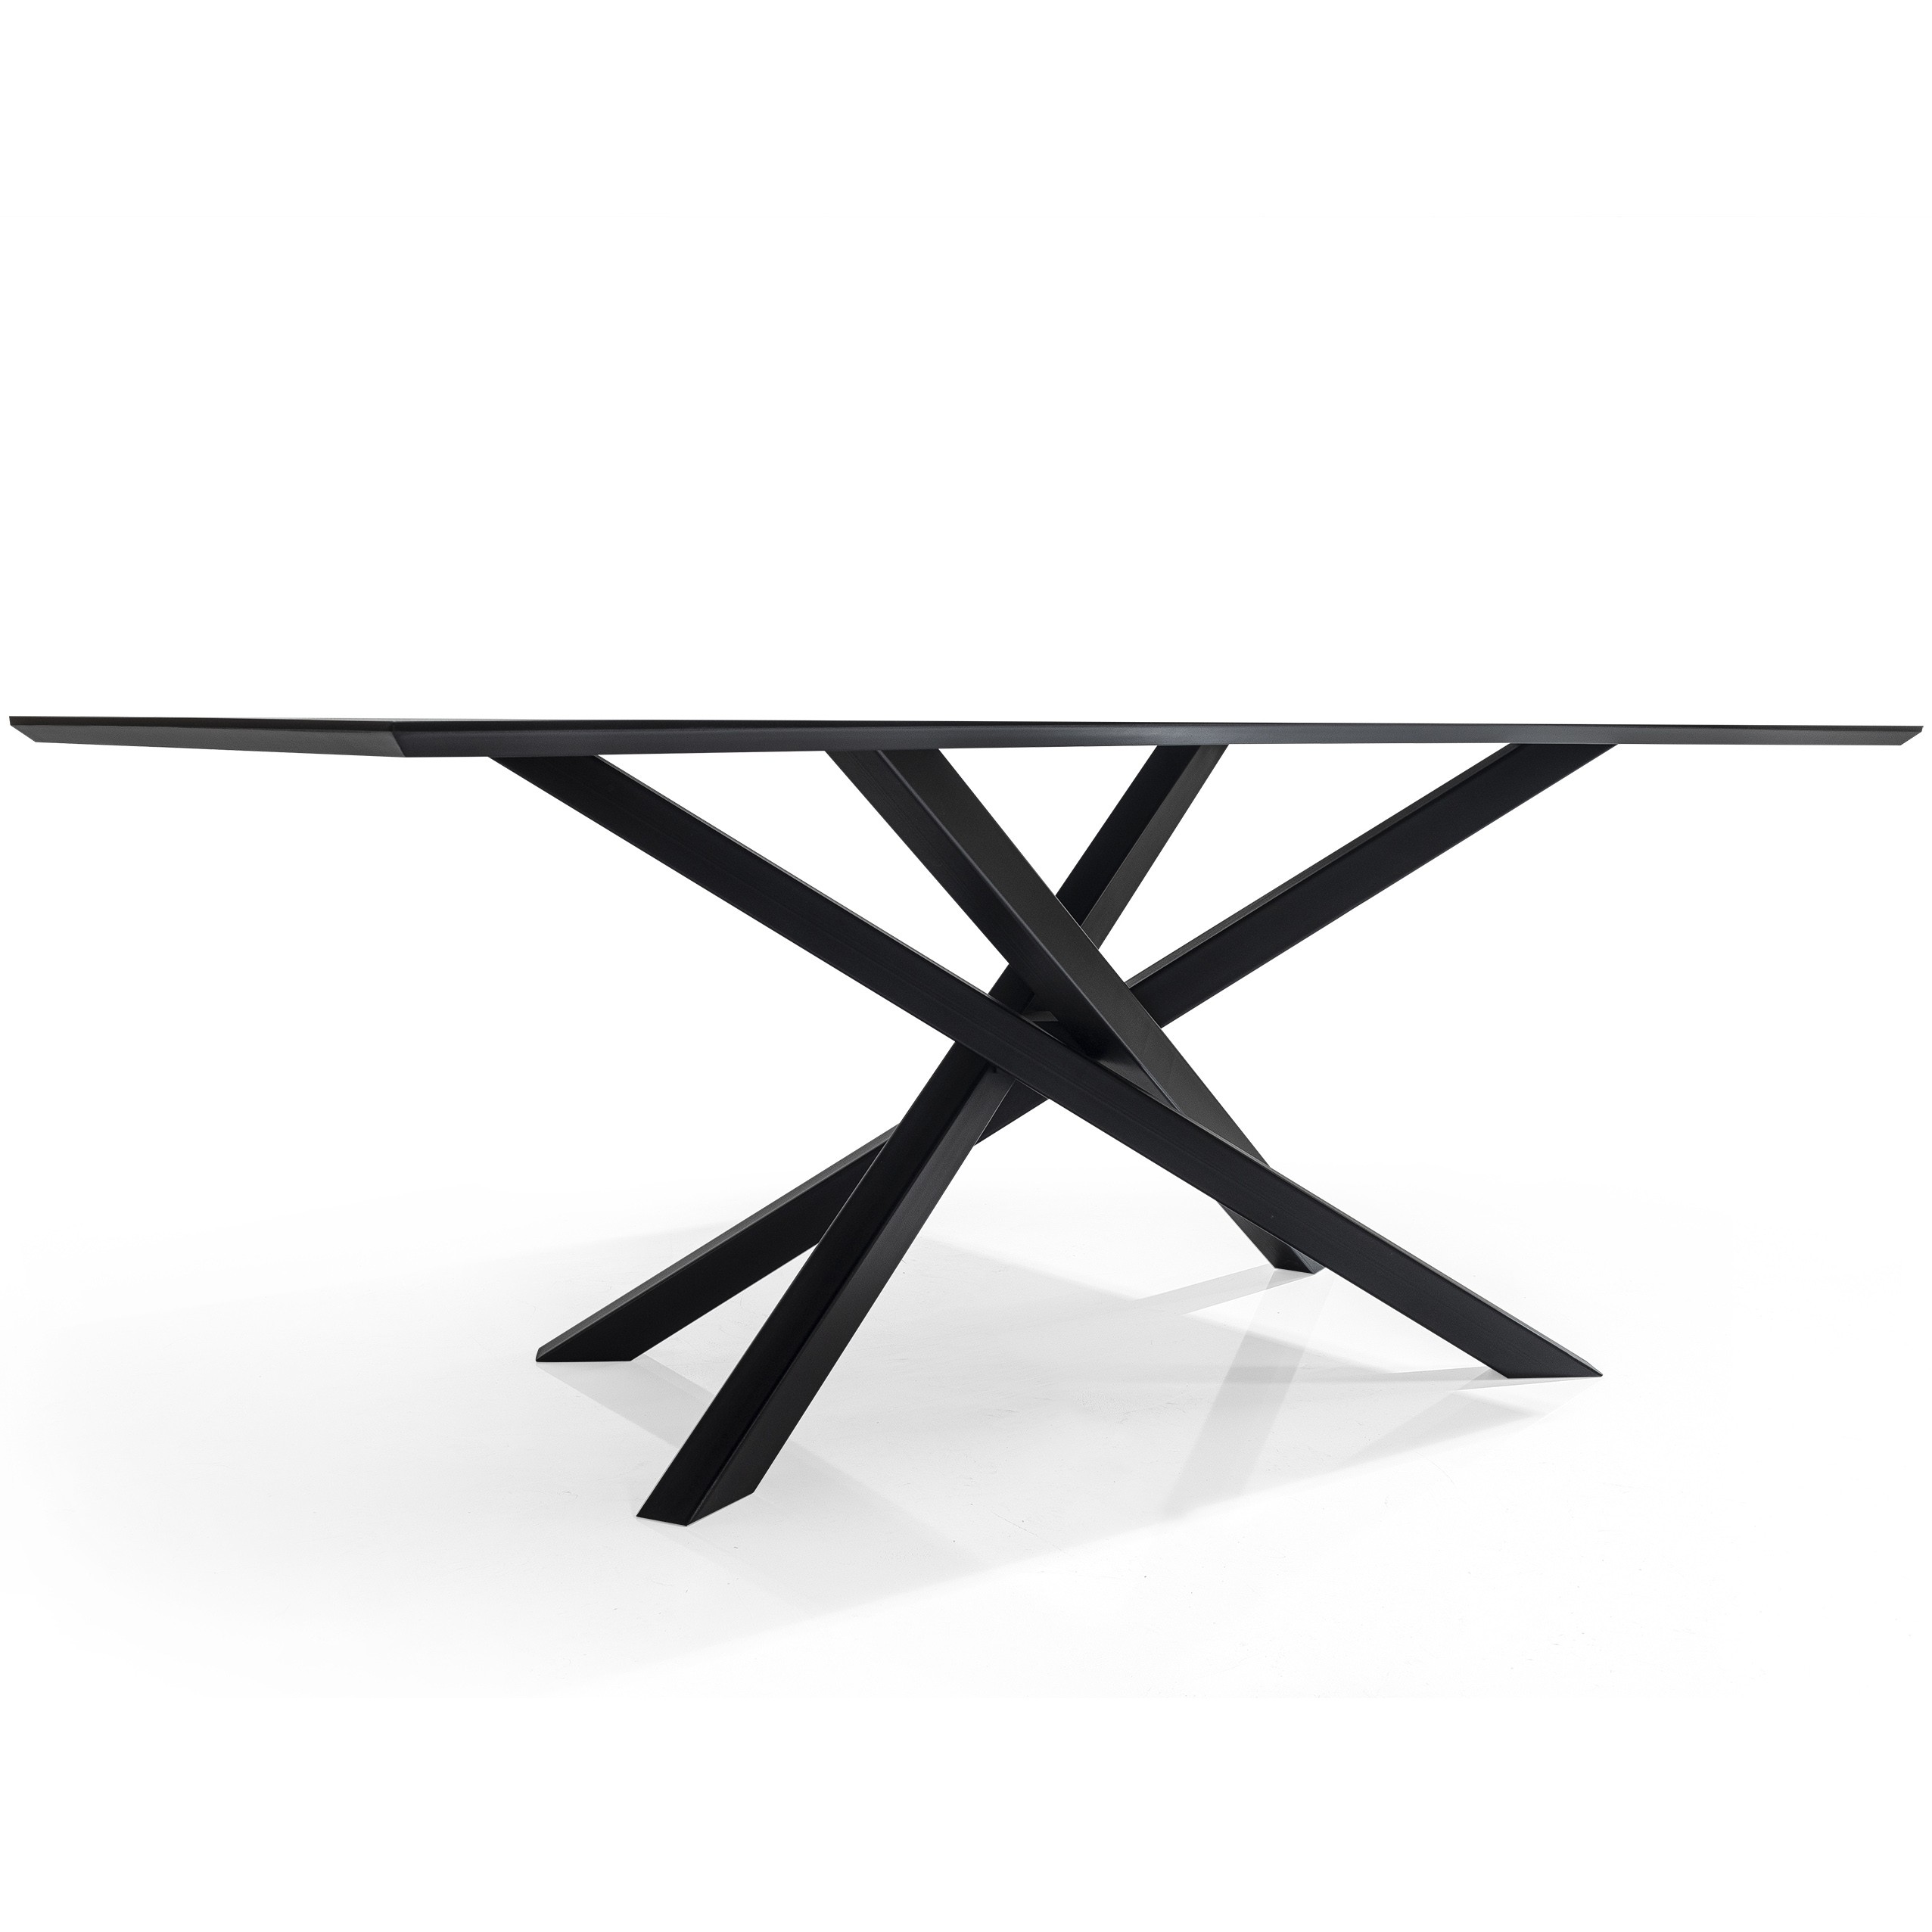 M010 Dining Table